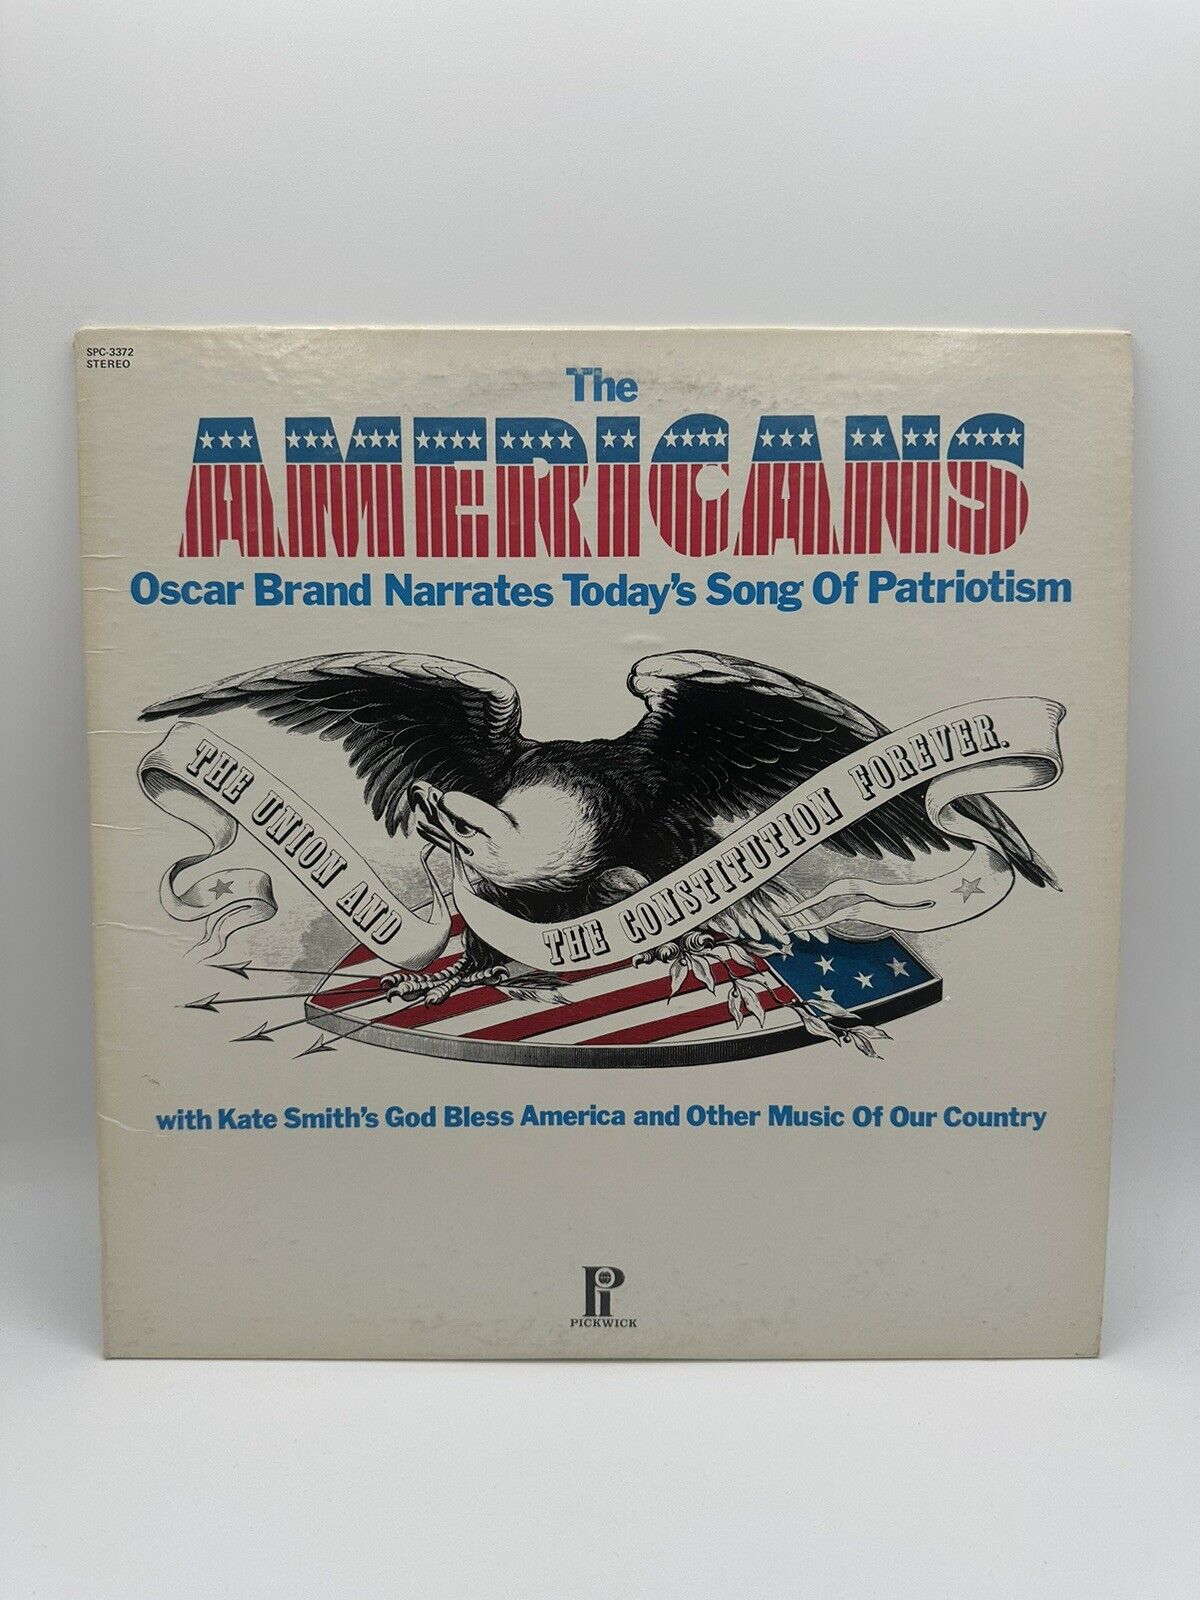 The Americans- Oscar Brand narrates today's songs of patriotism Vinyl Record1974